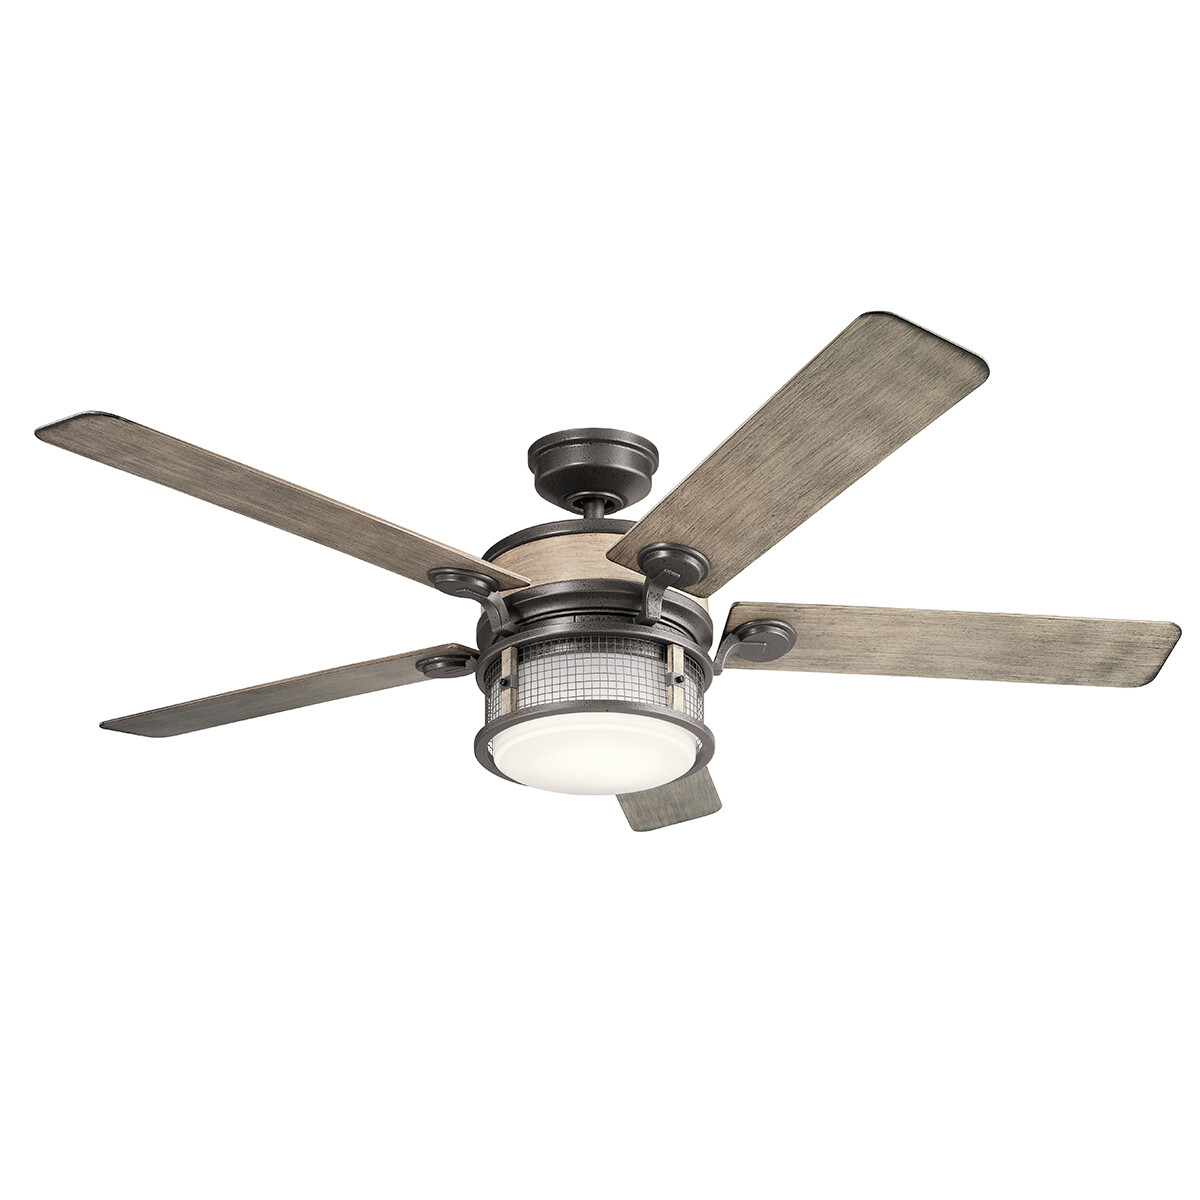 AHRENDALE ANVIL IRON outdoor ceiling fan Ø152 light integrated and remote control included